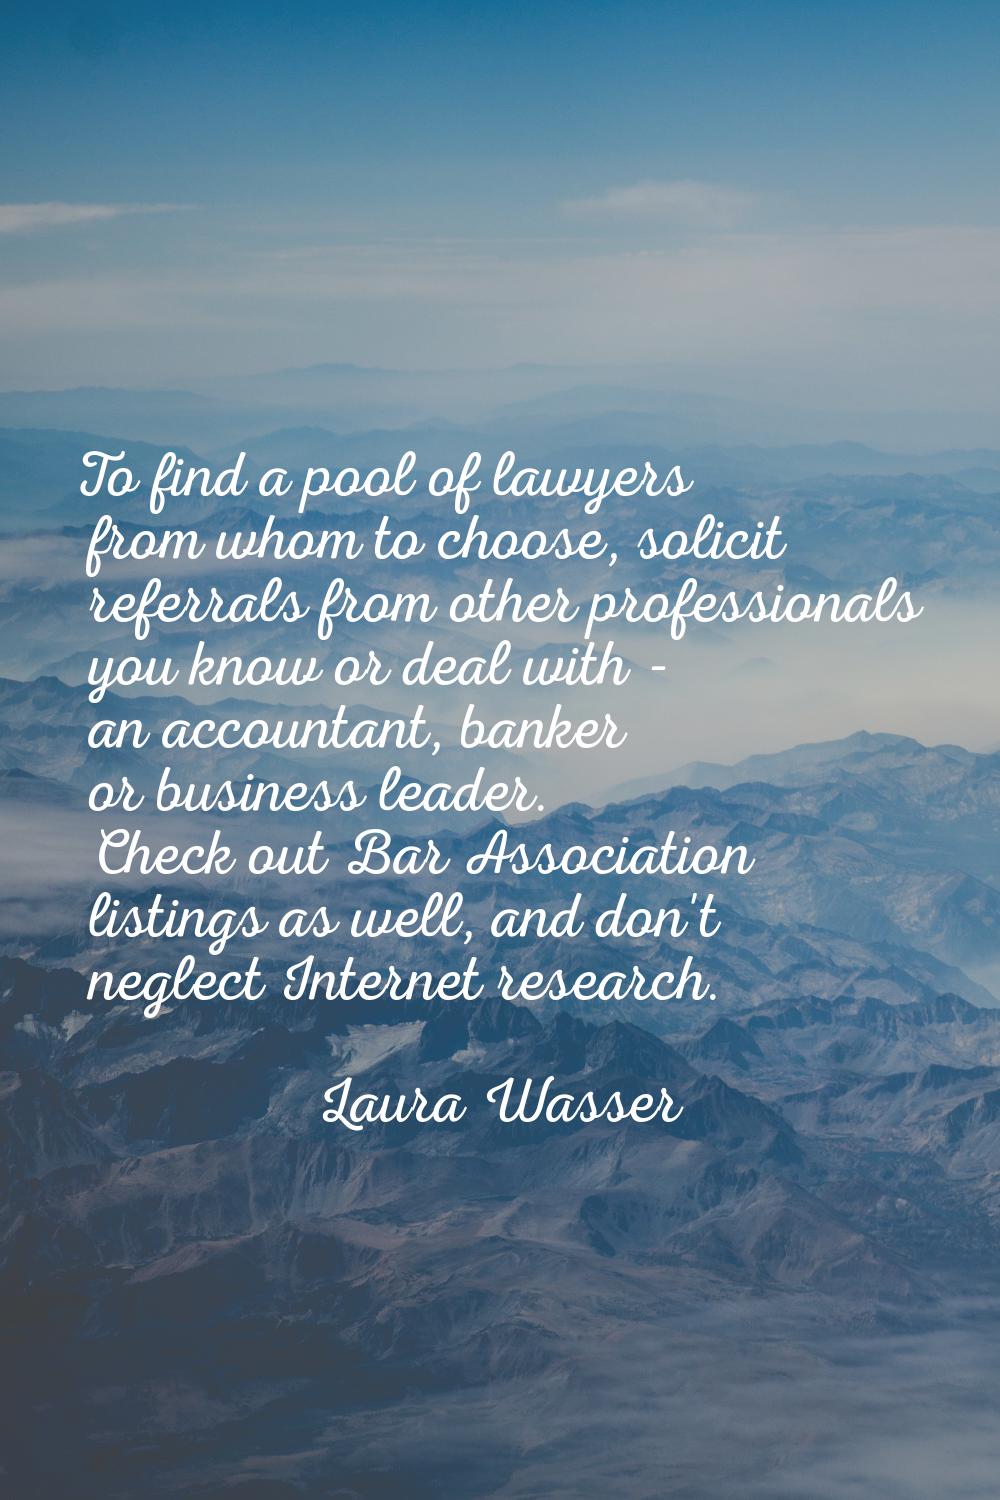 To find a pool of lawyers from whom to choose, solicit referrals from other professionals you know 